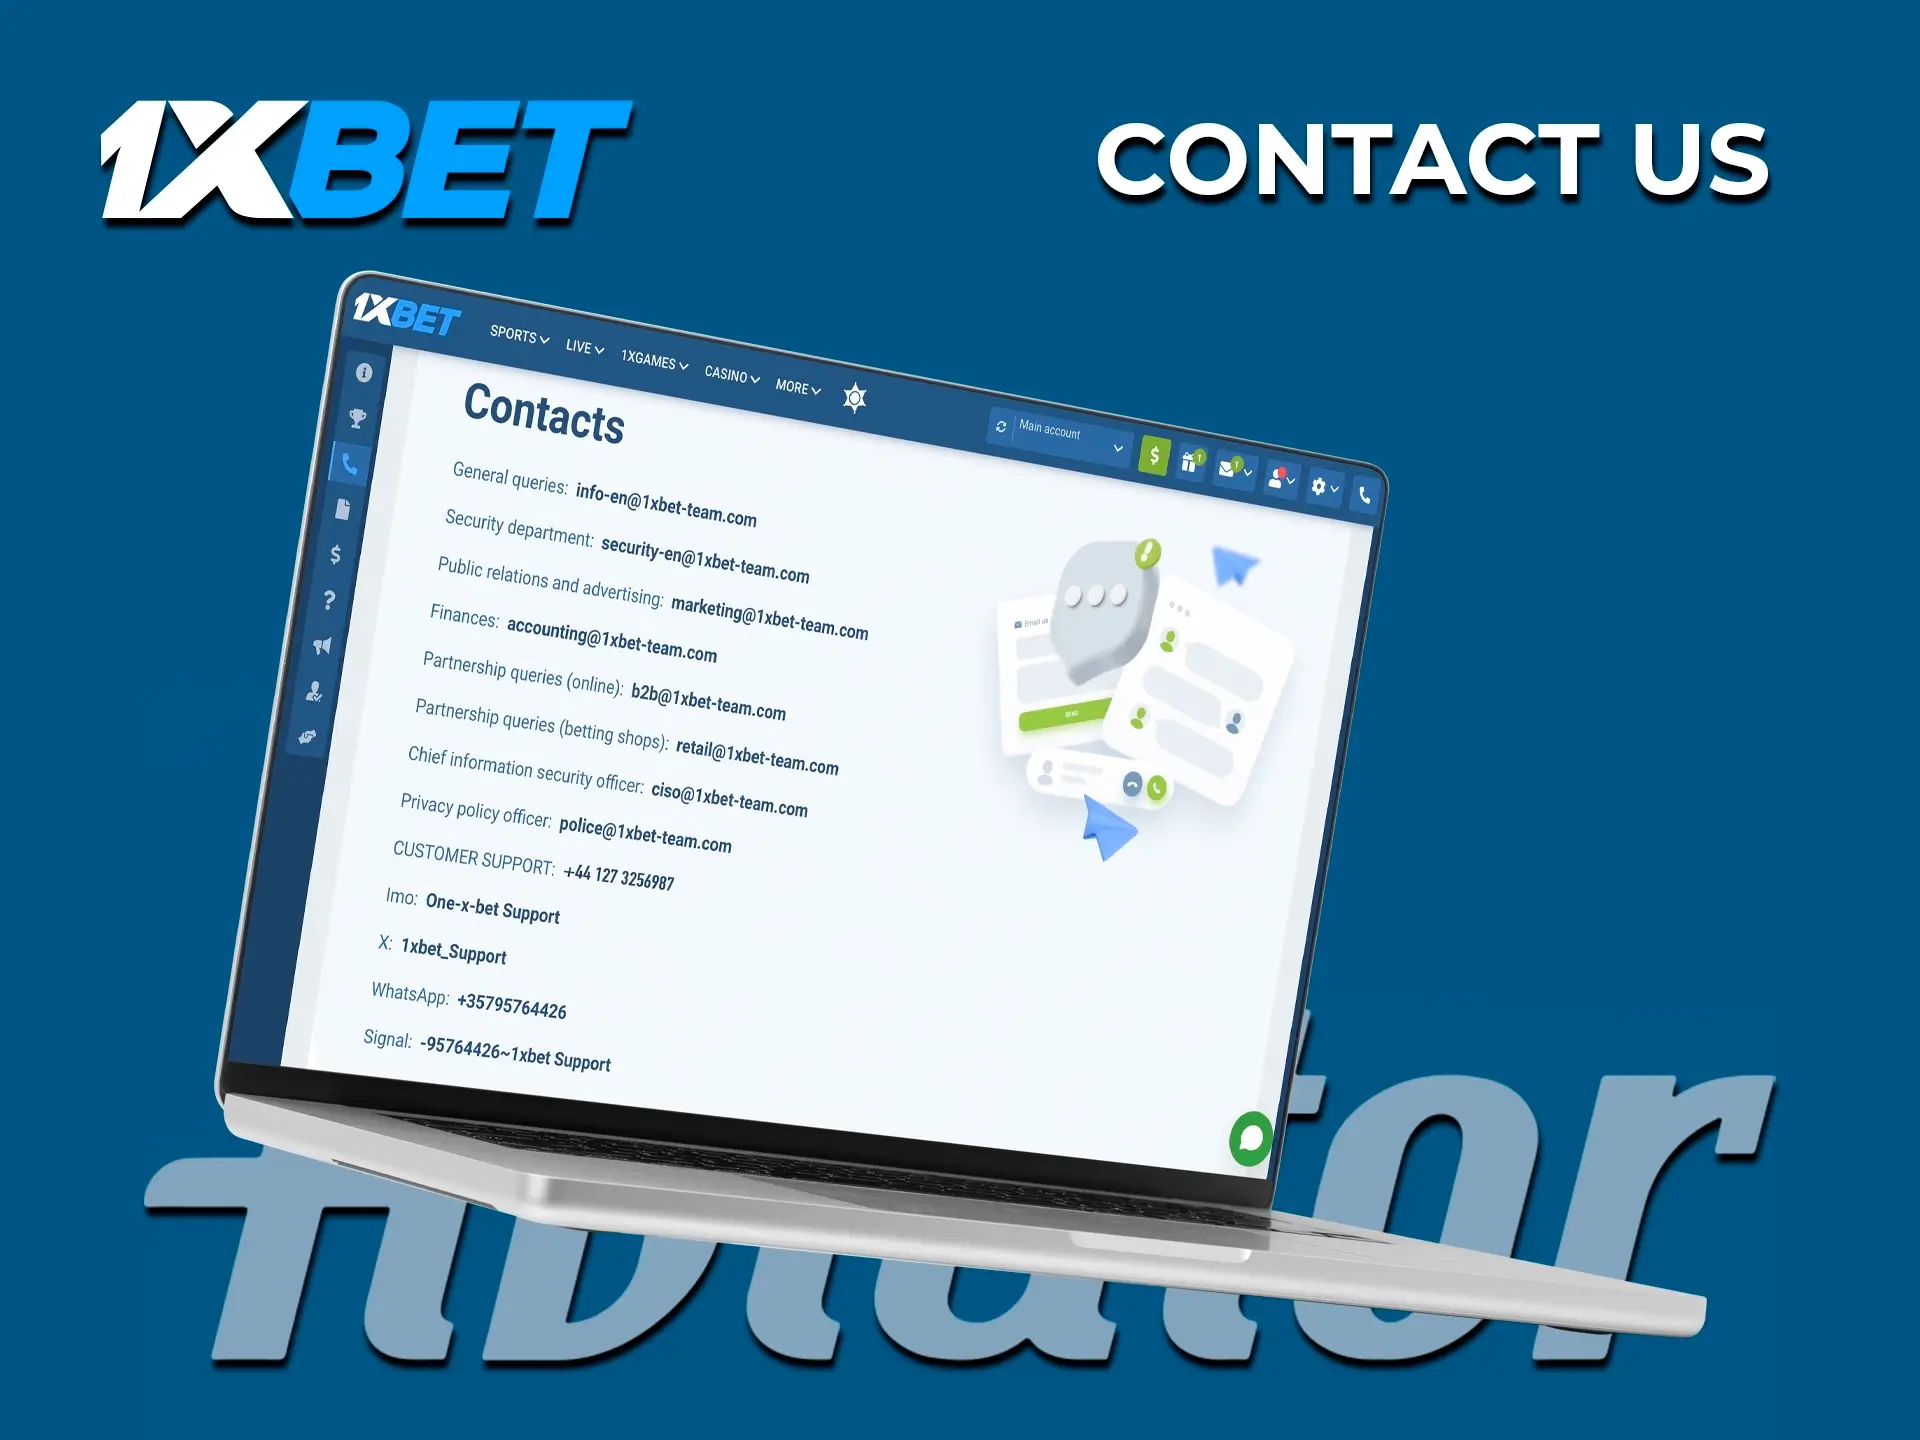 The team of professionals at 1xBet will be able to solve any of your questions when you contact them.